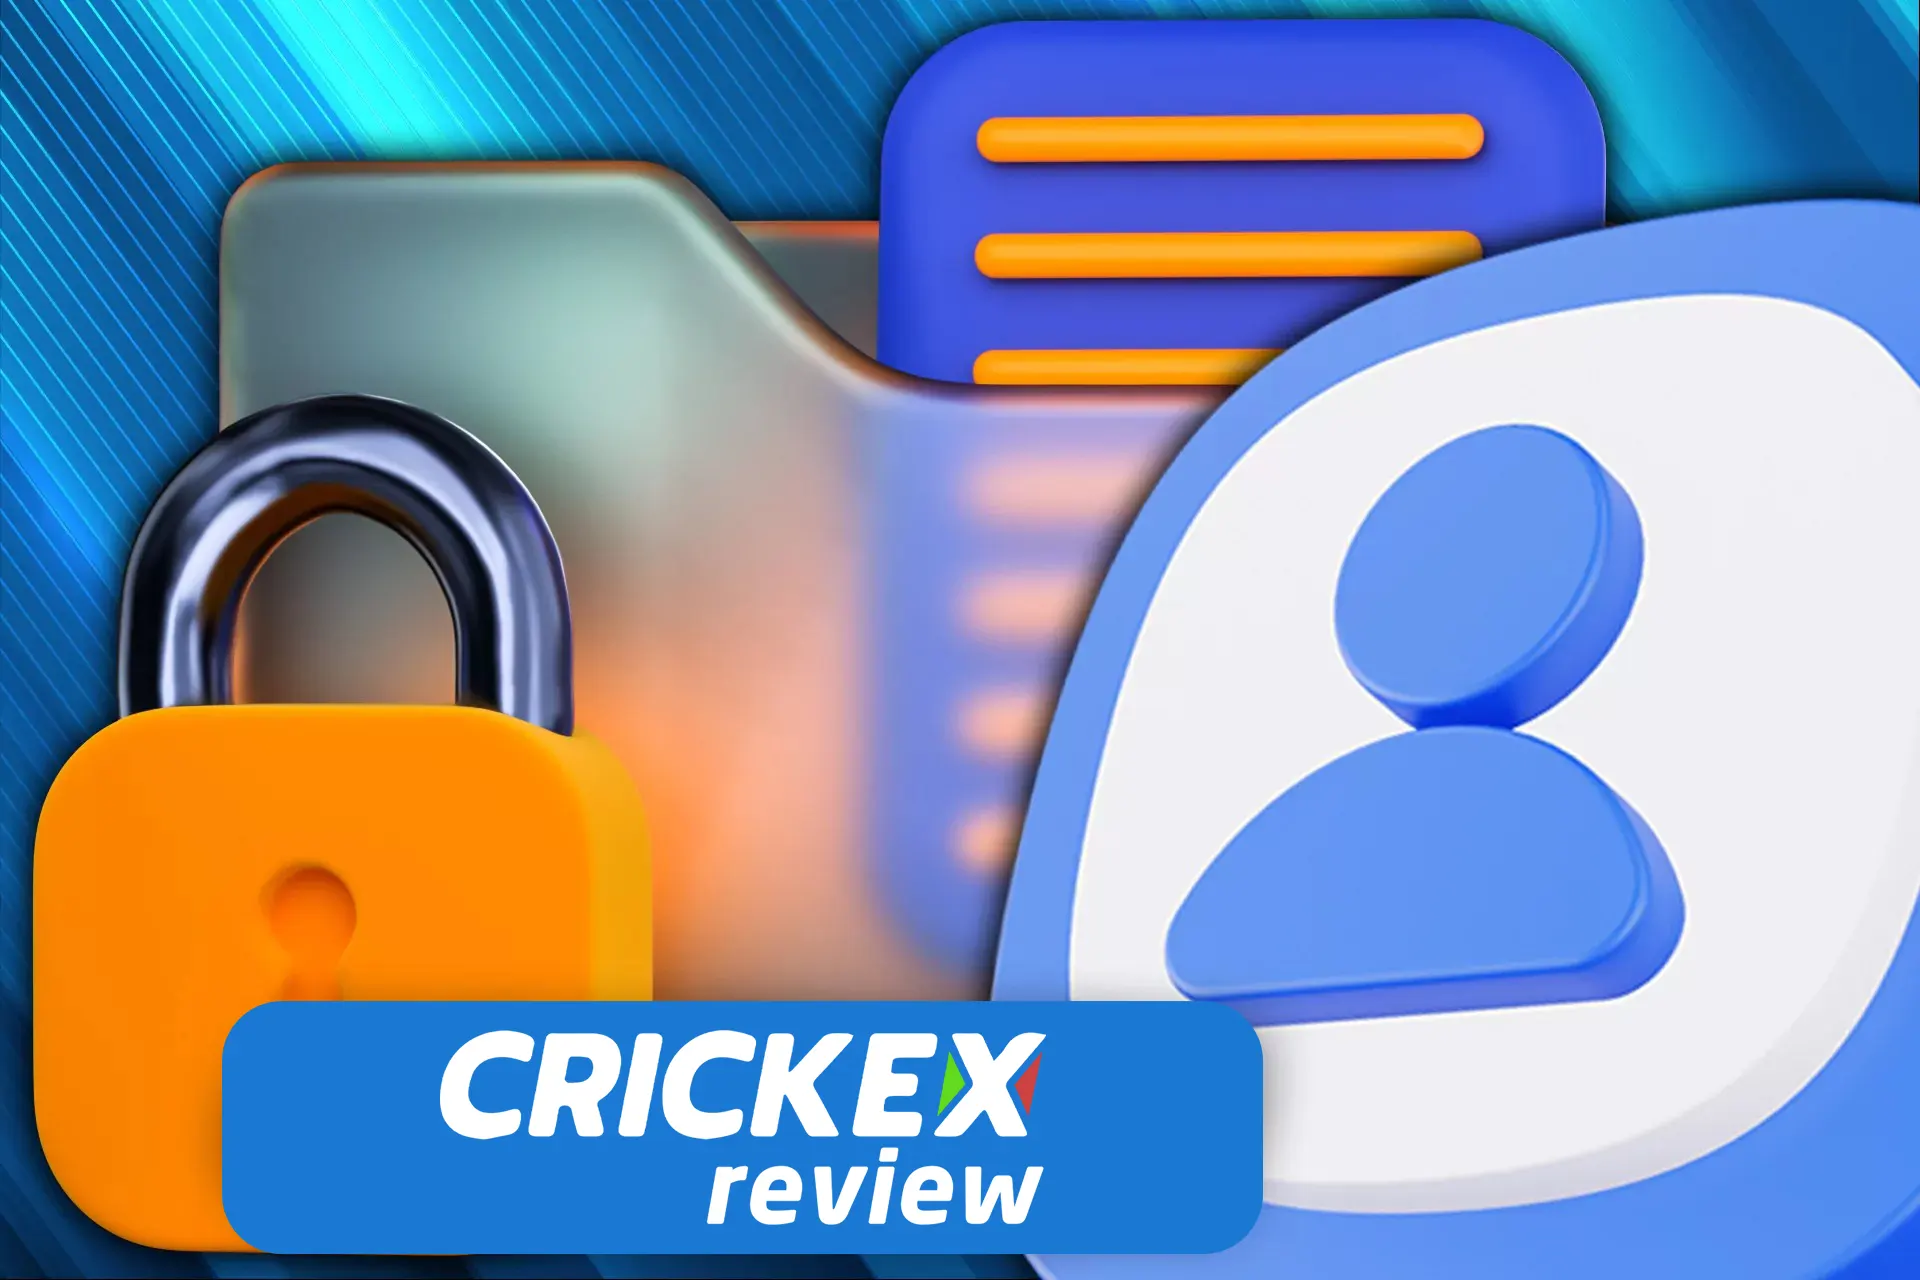 Crickex protects tha users personal data and money from fraud.